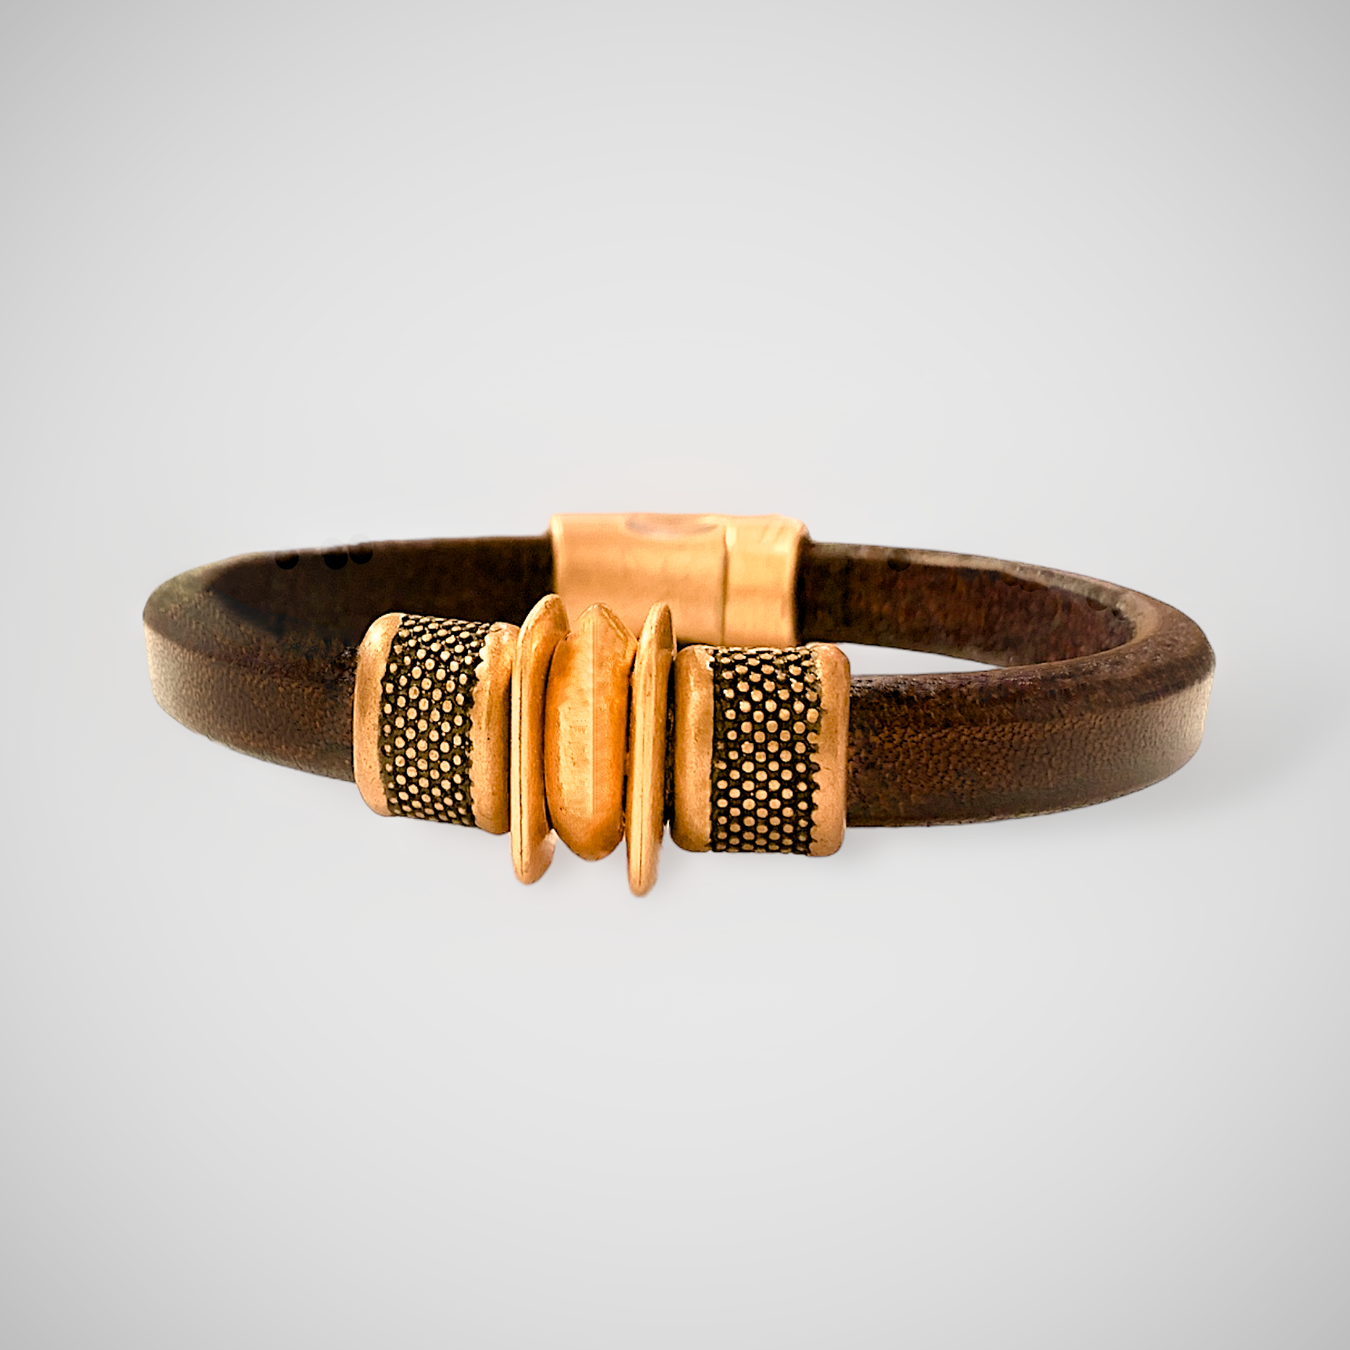 Handmade rolled leather bracelet with copper accents.  Crafted in the USA.